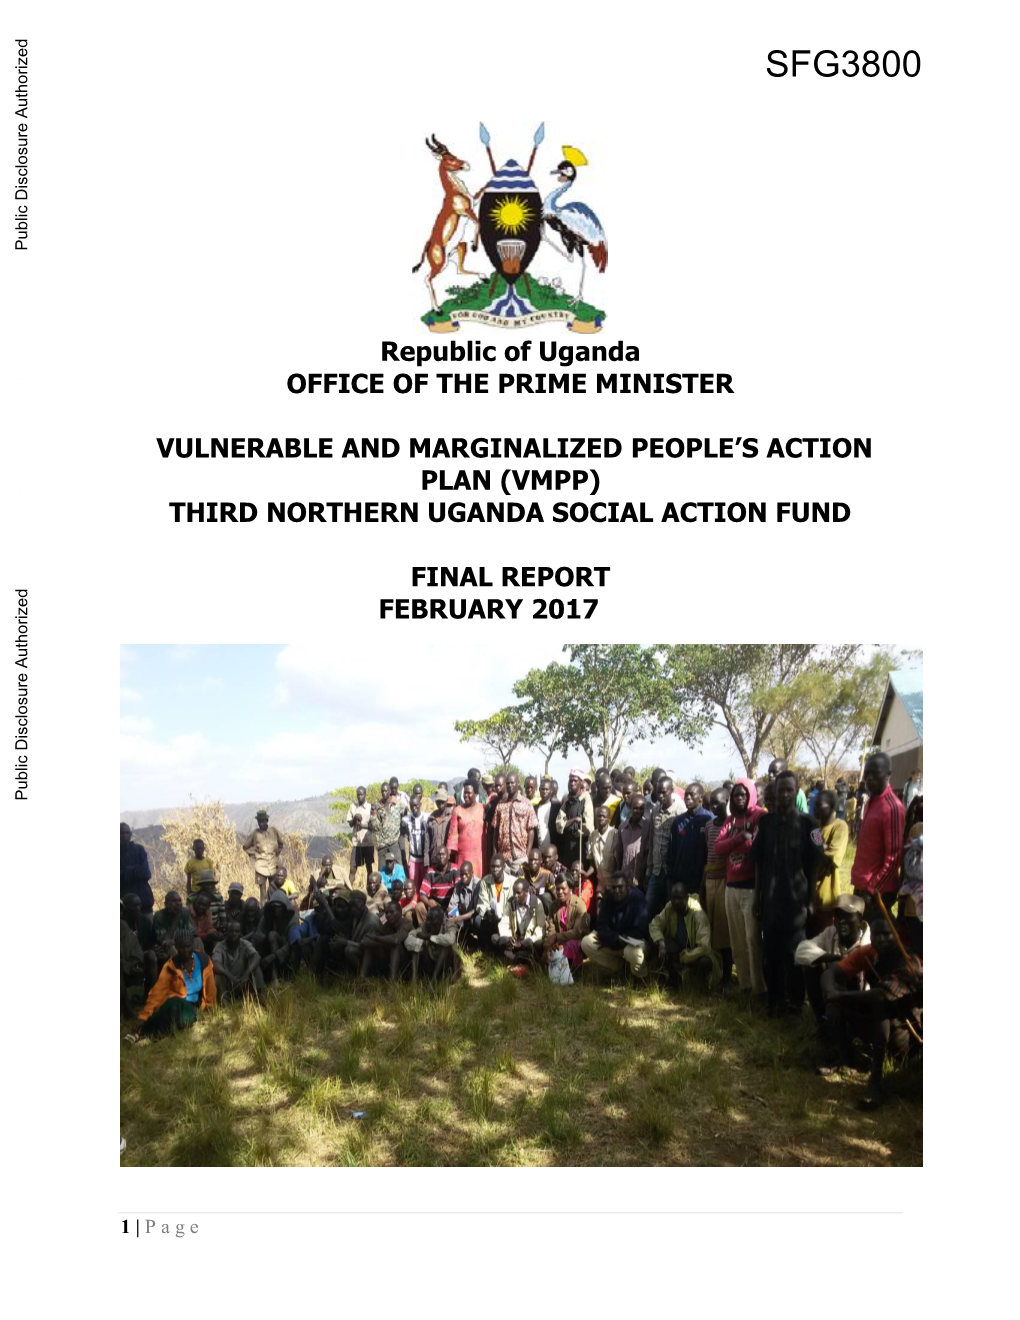 Third Northern Uganda Social Action Fund Final Report February 2017